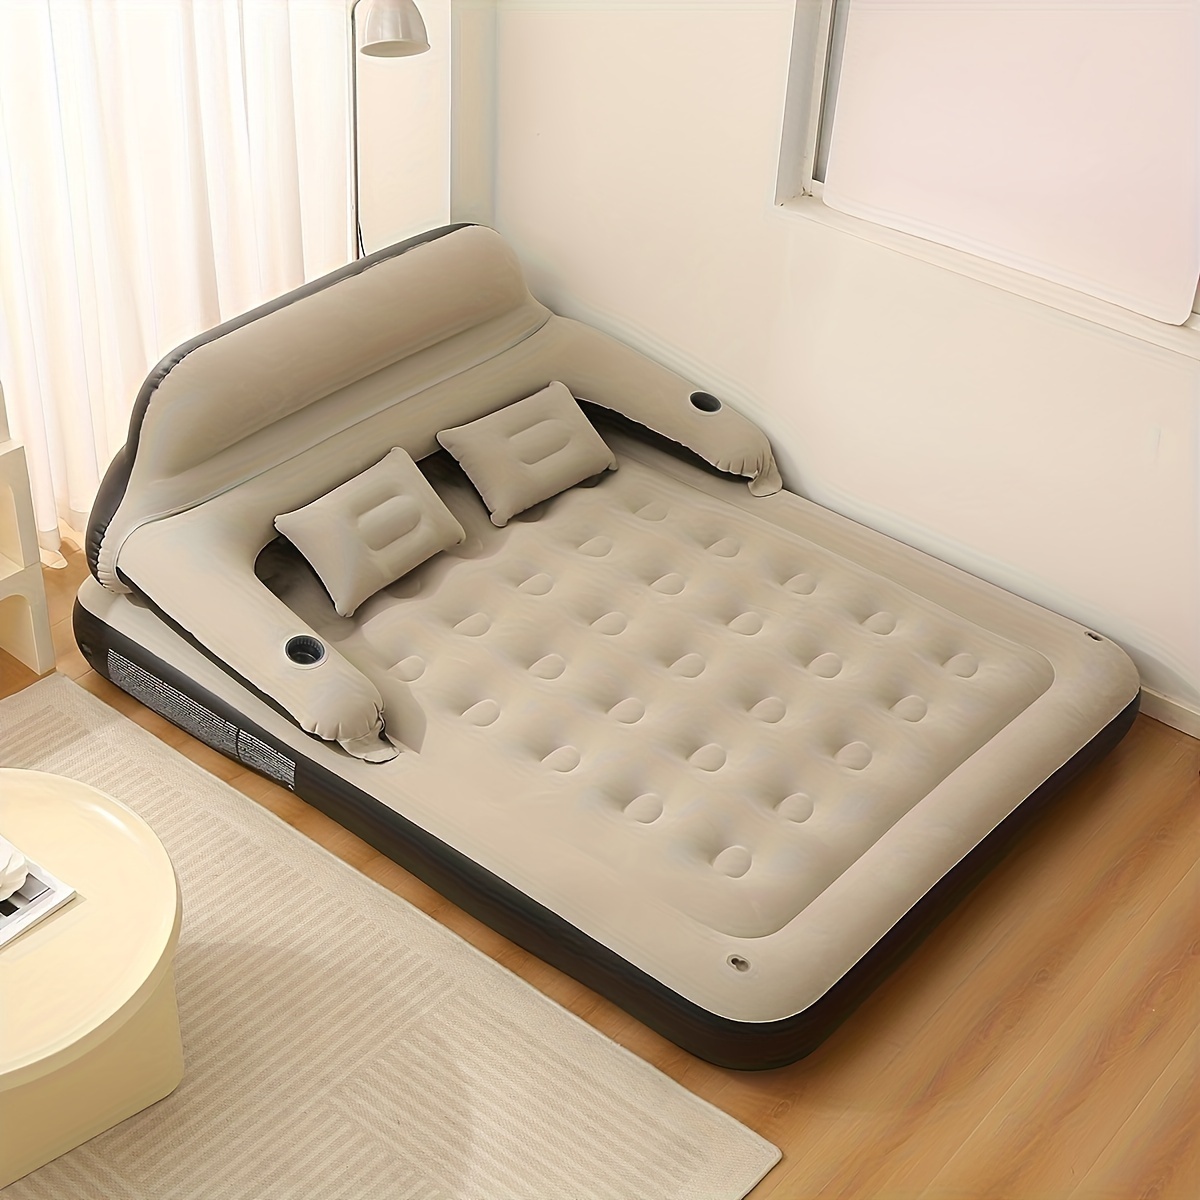 

1pc Air Mattress Inflatable Bed With Headboard And Pillows, Blow Up Couch Sofa Bed, Air Bed For Indoor/outdoor